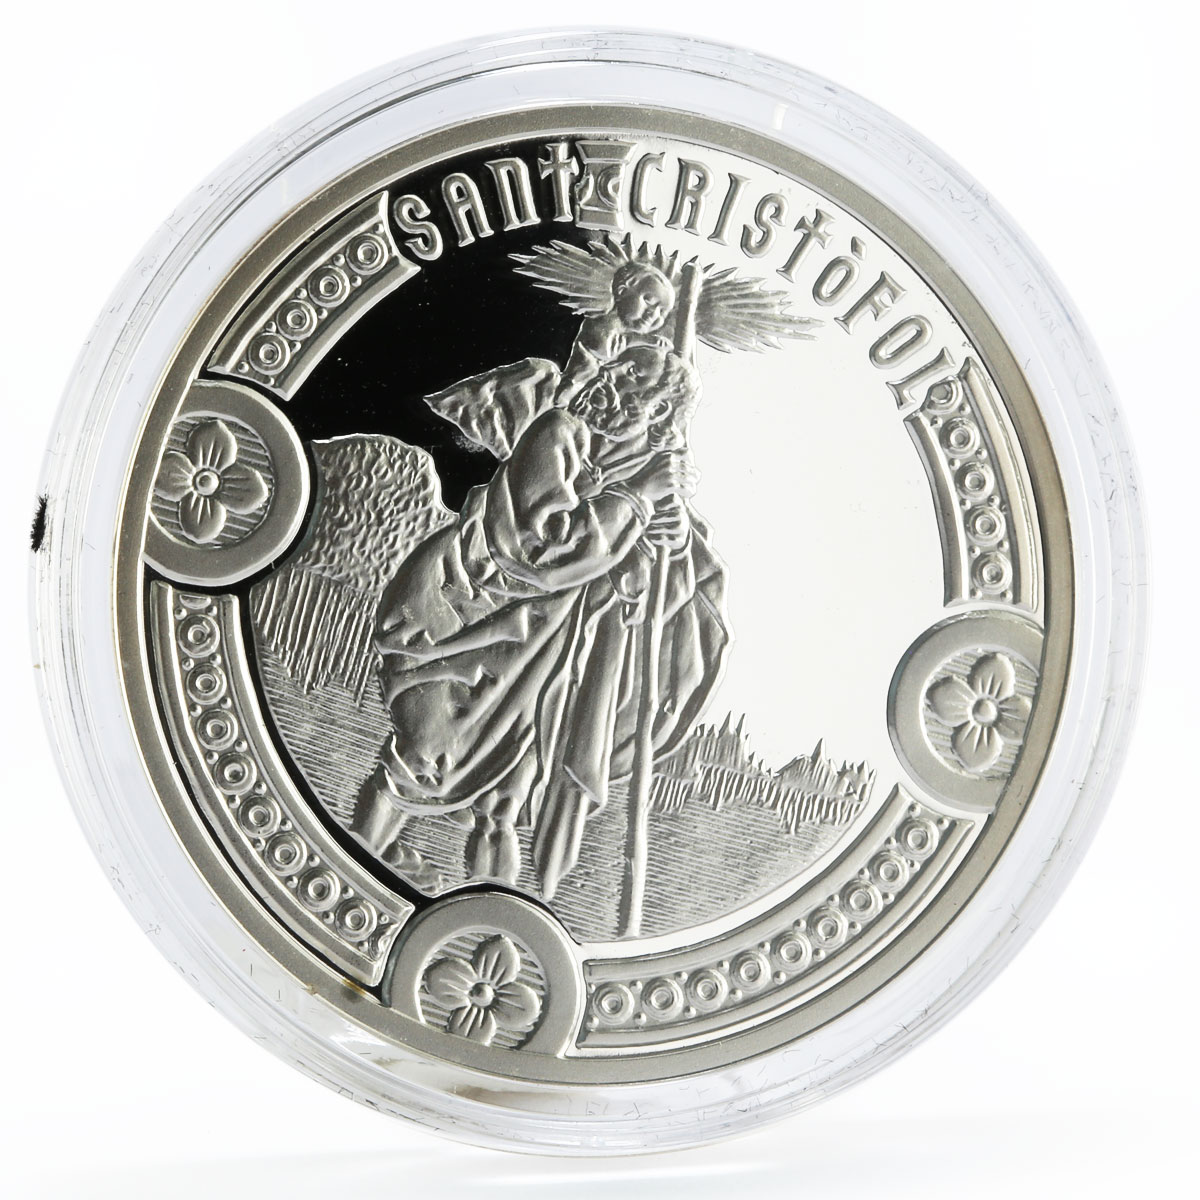 Andorra 10 diners Holy Helpers series St. Christopher proof silver coin 2010